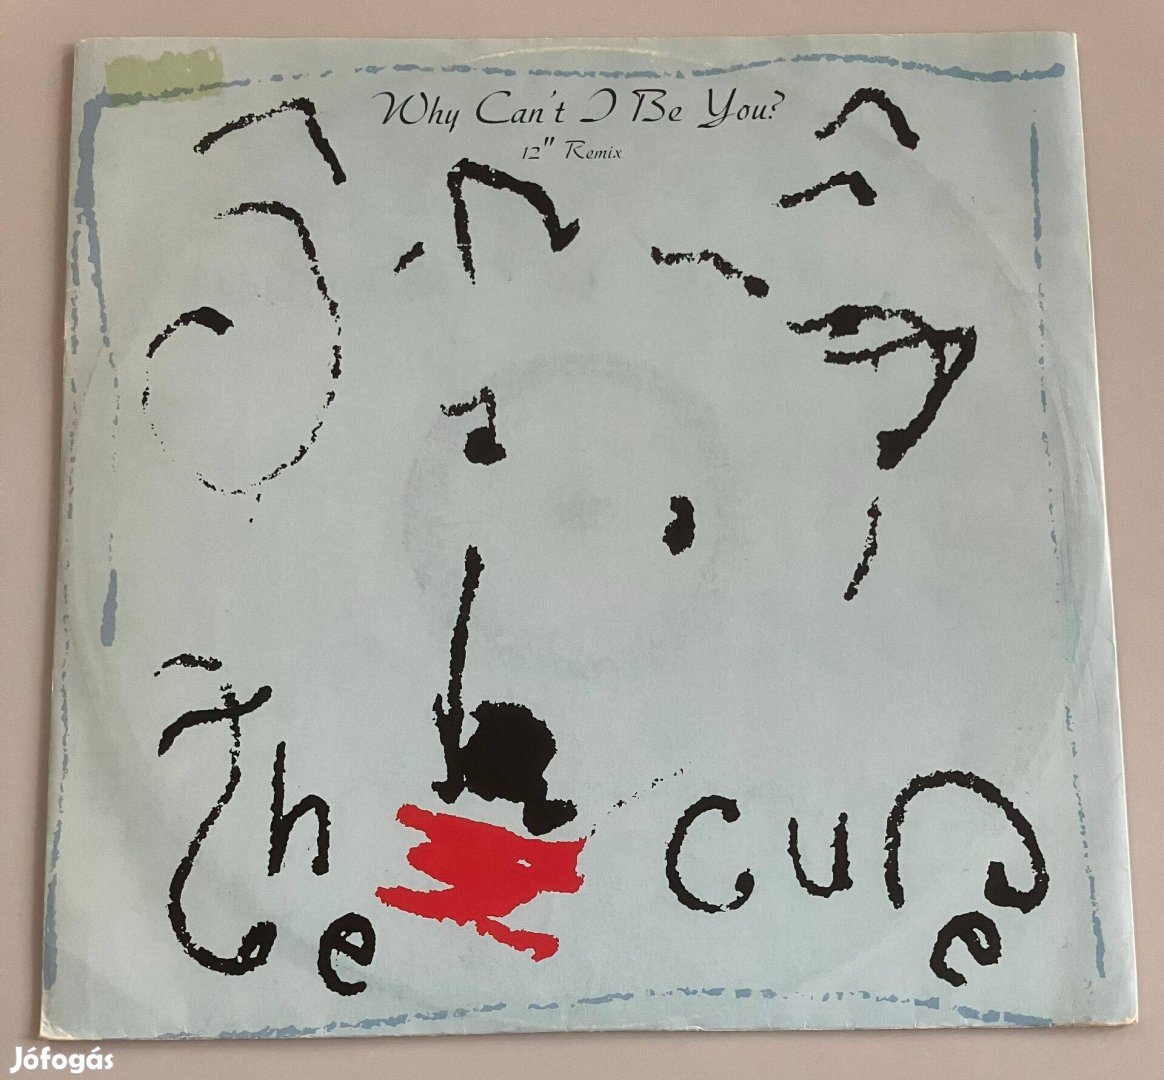 Cure - Why cant I be you? (német, 1987)